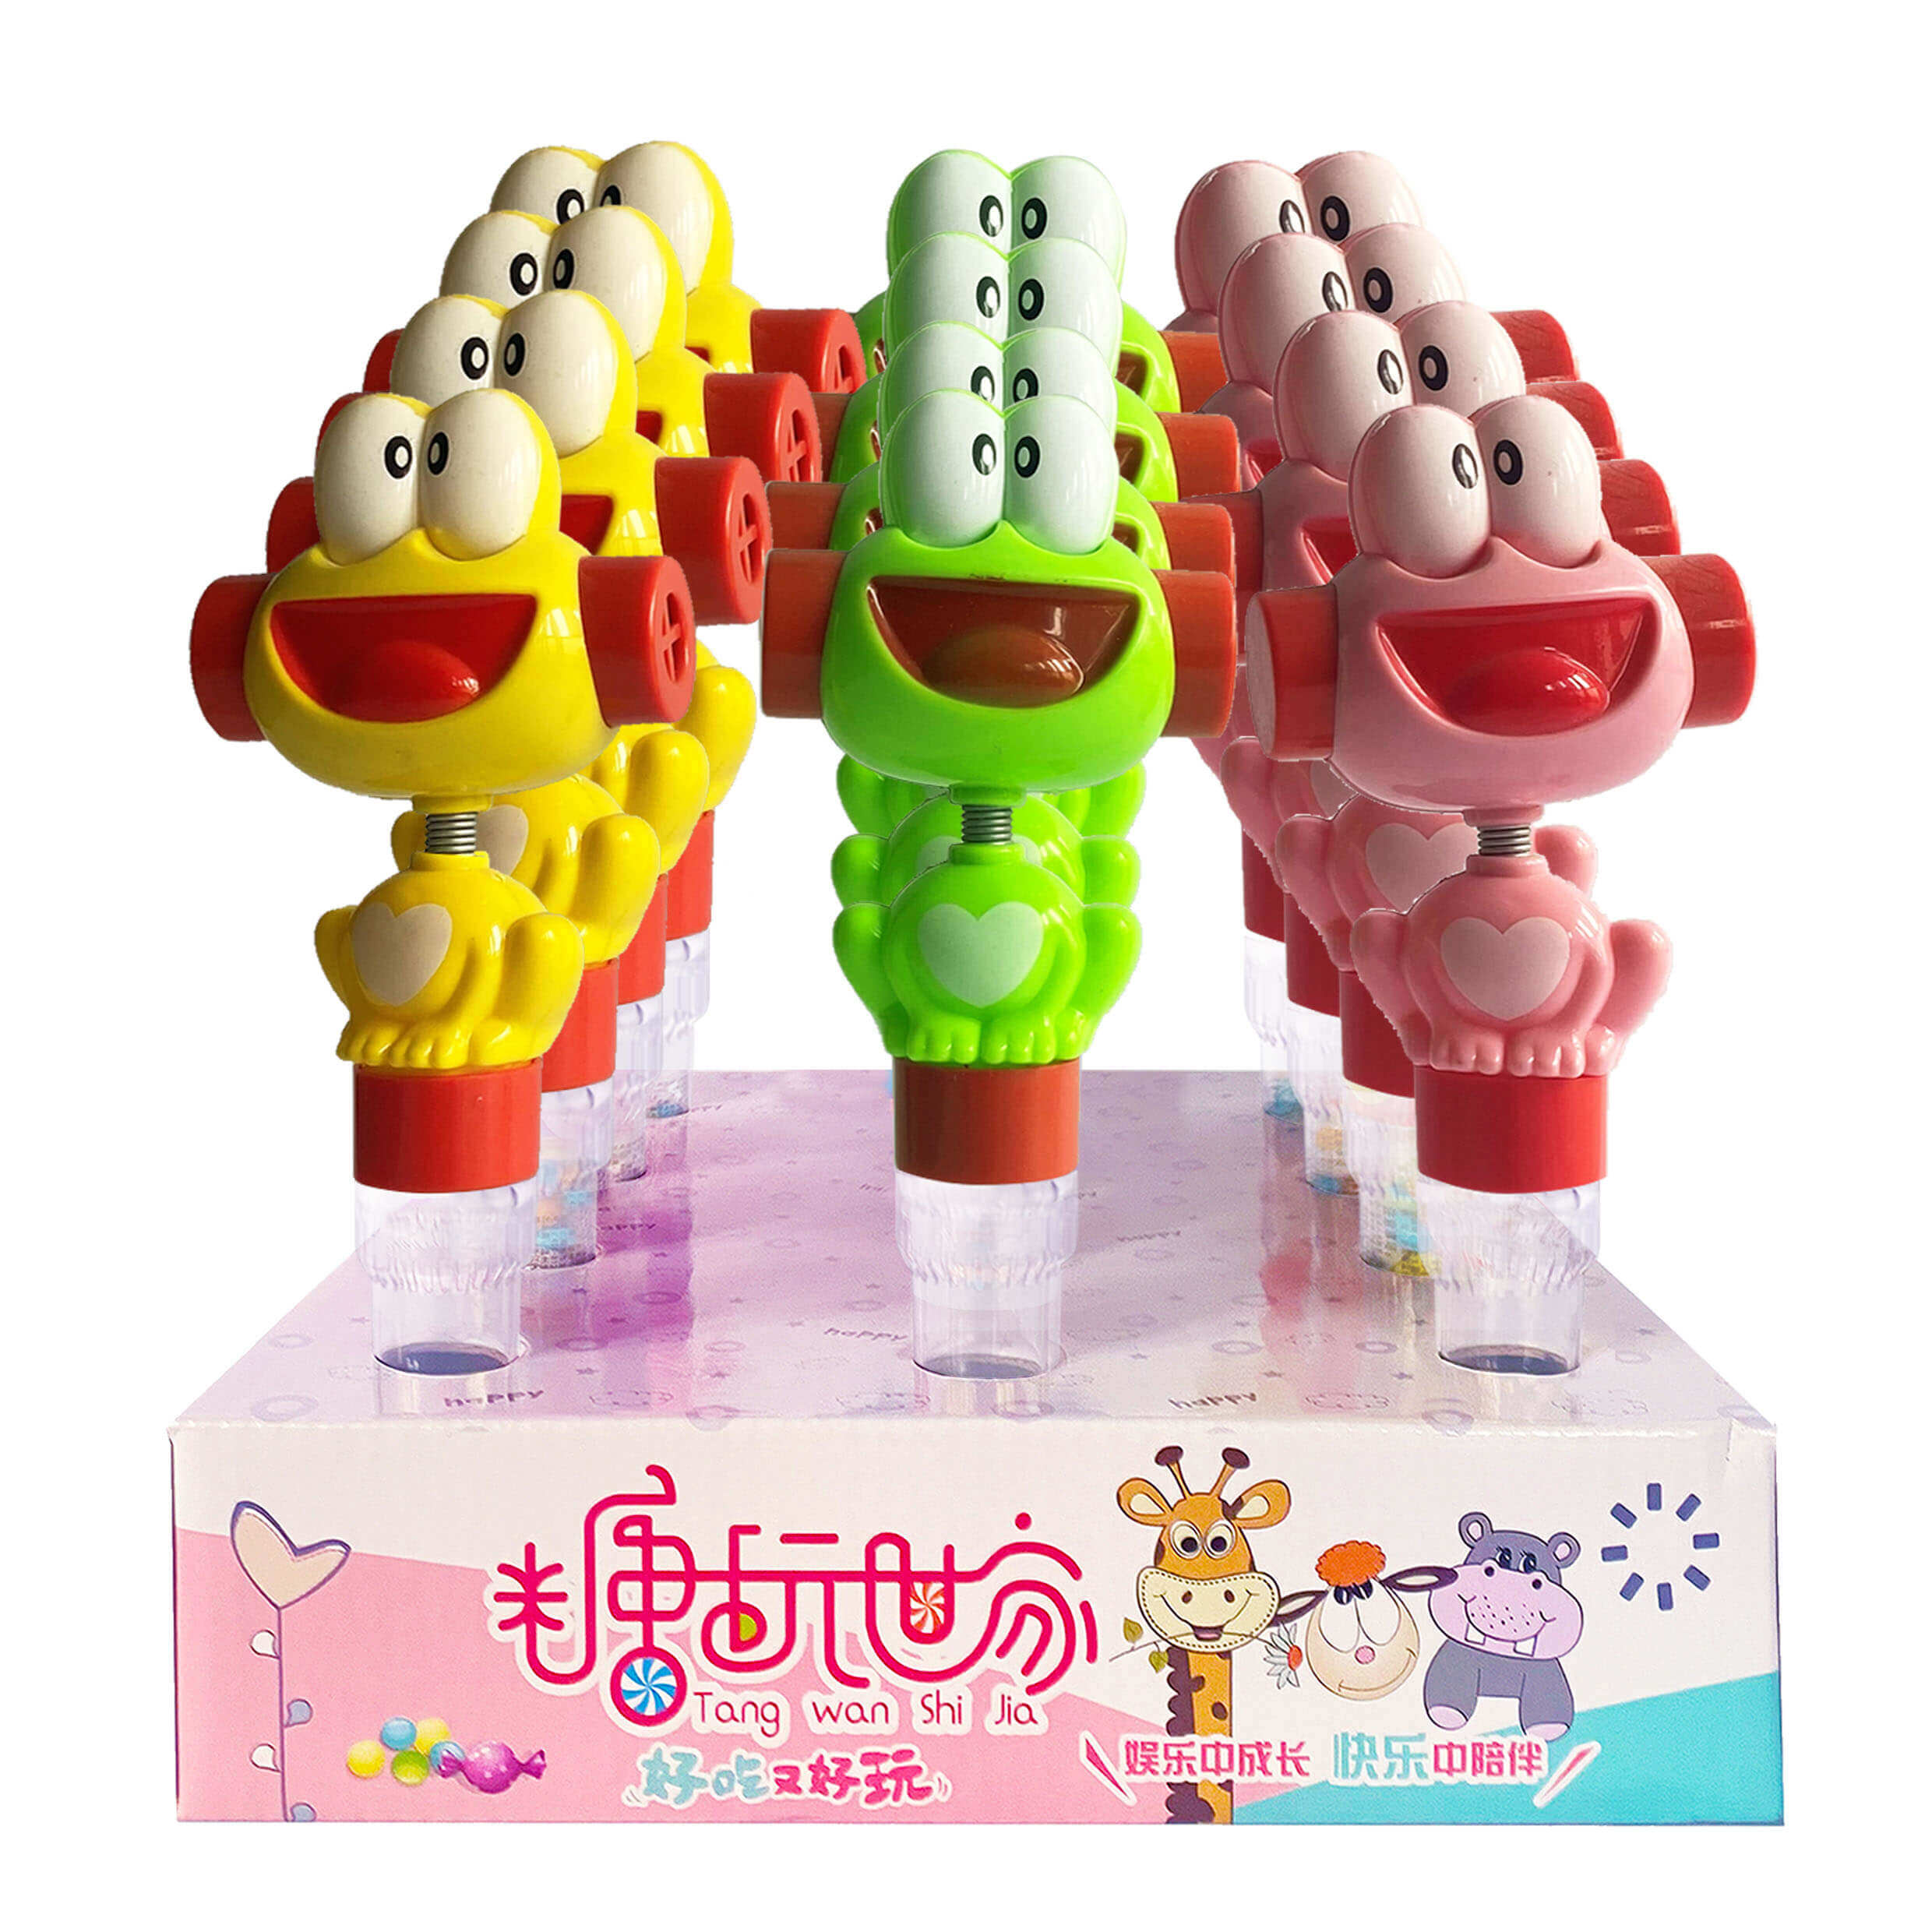 candy factory toy, plastic candy toys, lollipop animal toy